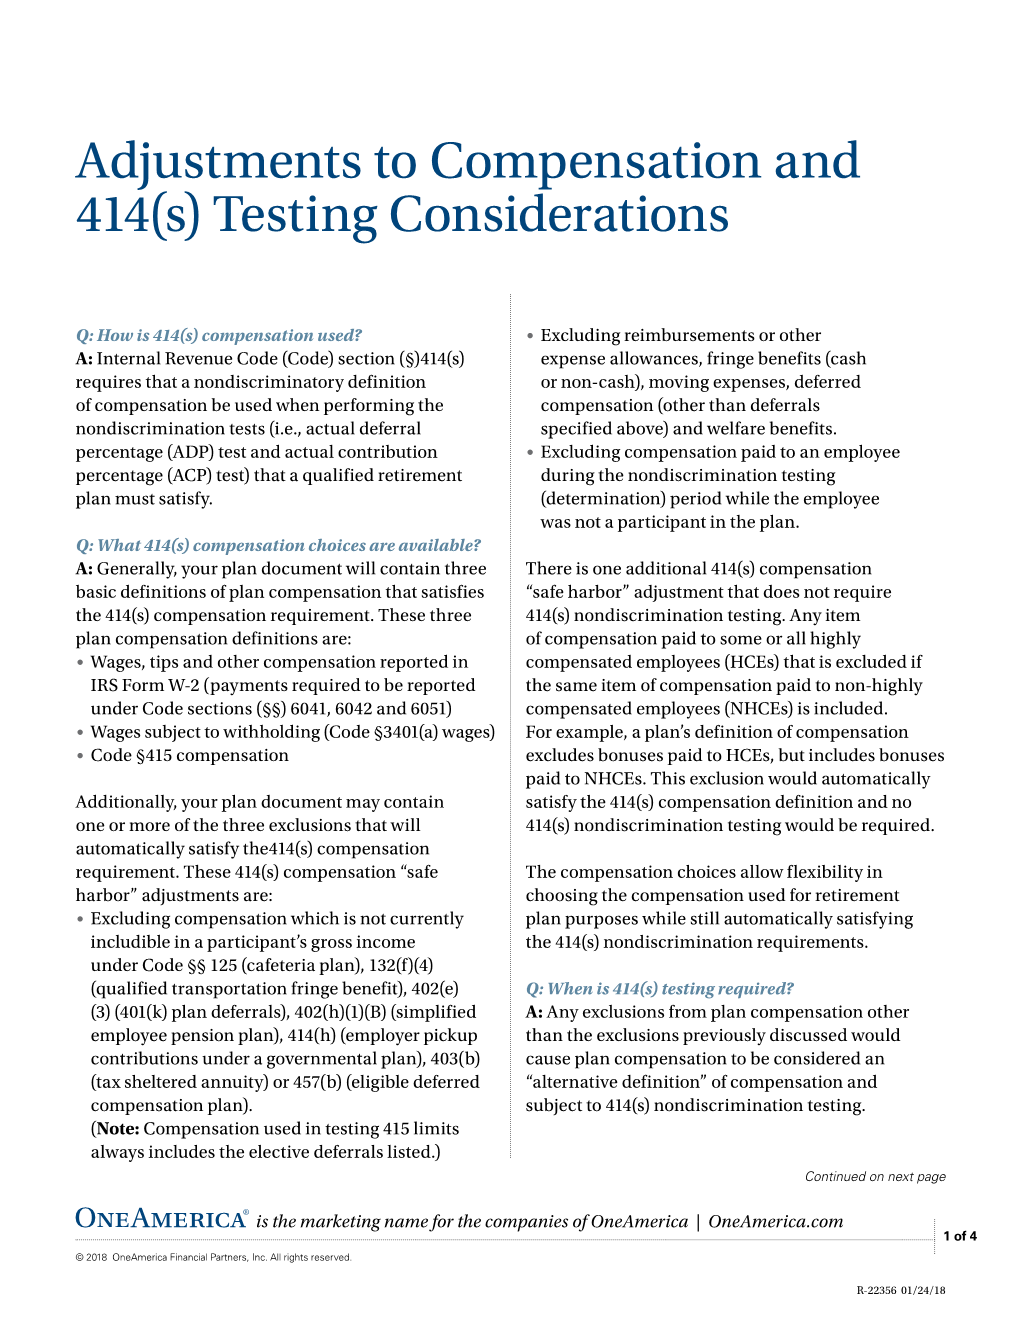 Adjustments to Compensation and 414(S) Testing Considerations